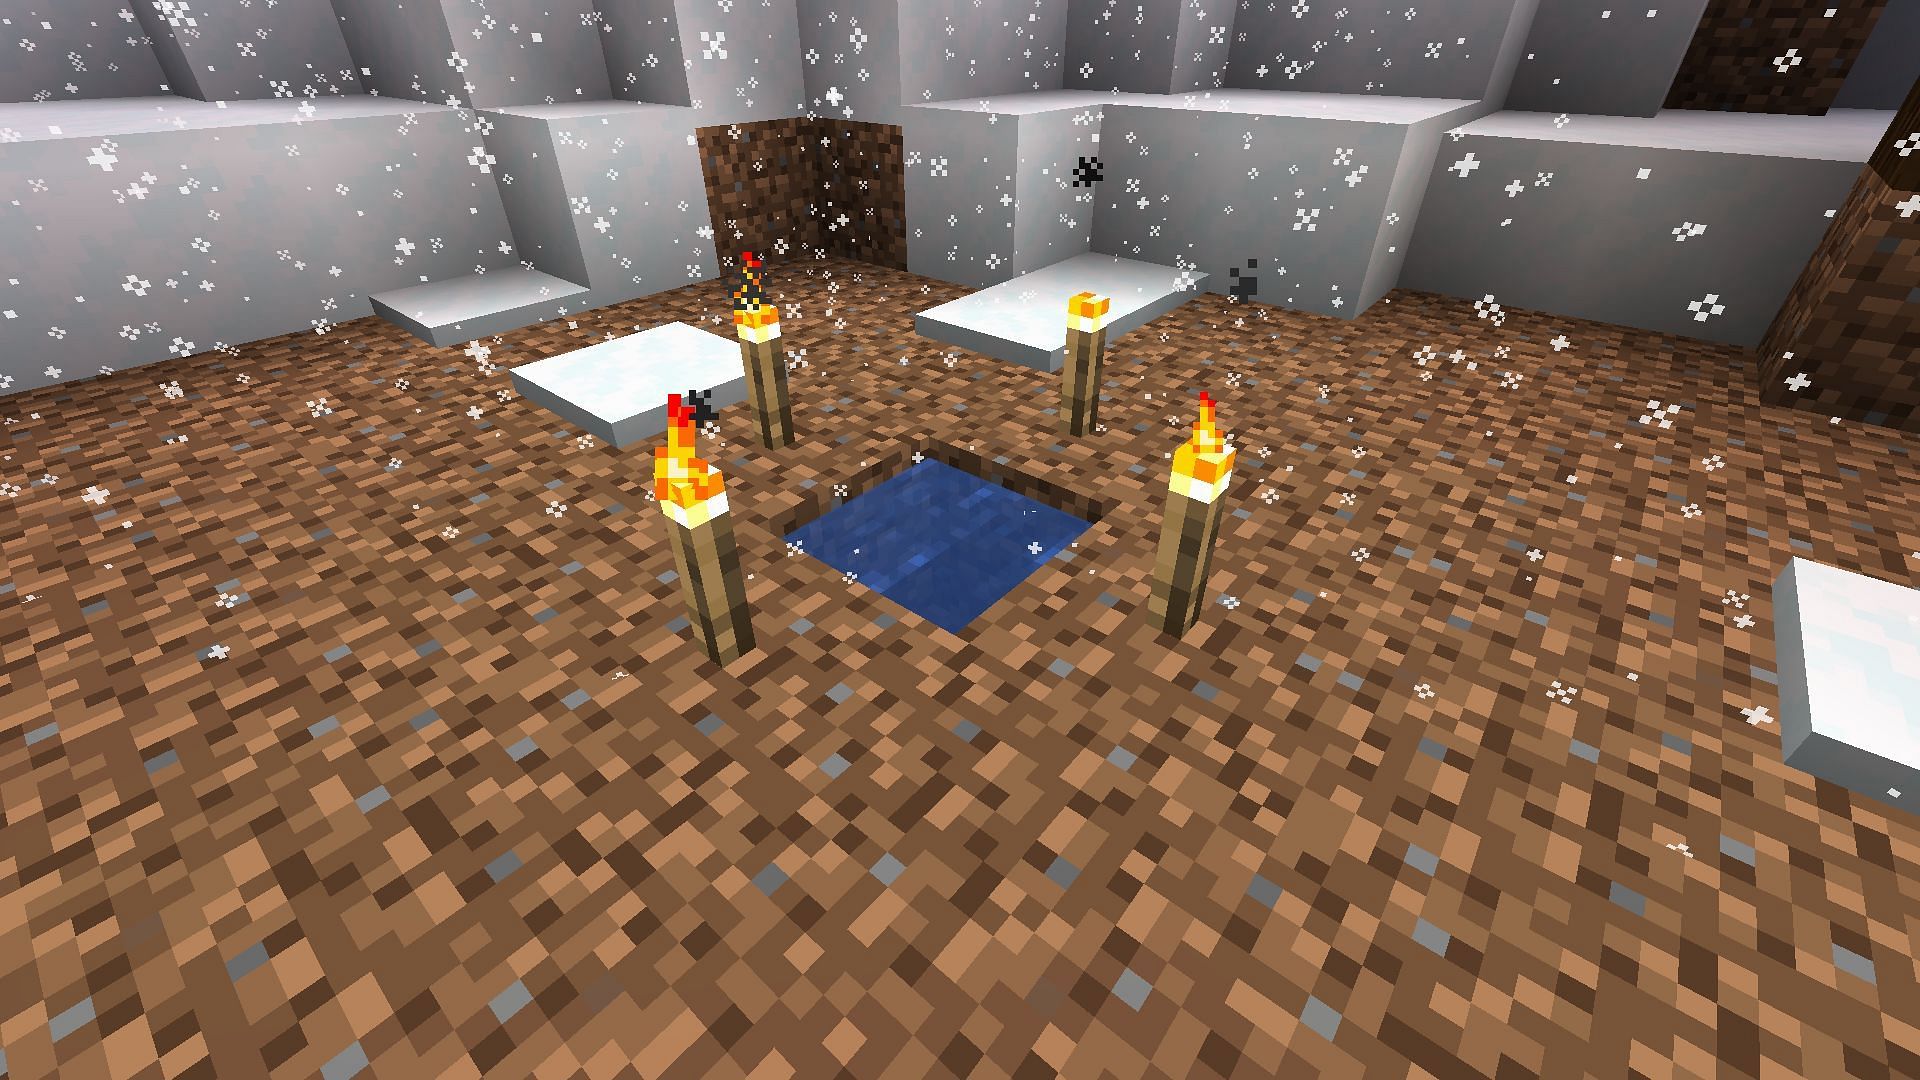 An example of torches keeping water from freezing (Image via Minecraft)